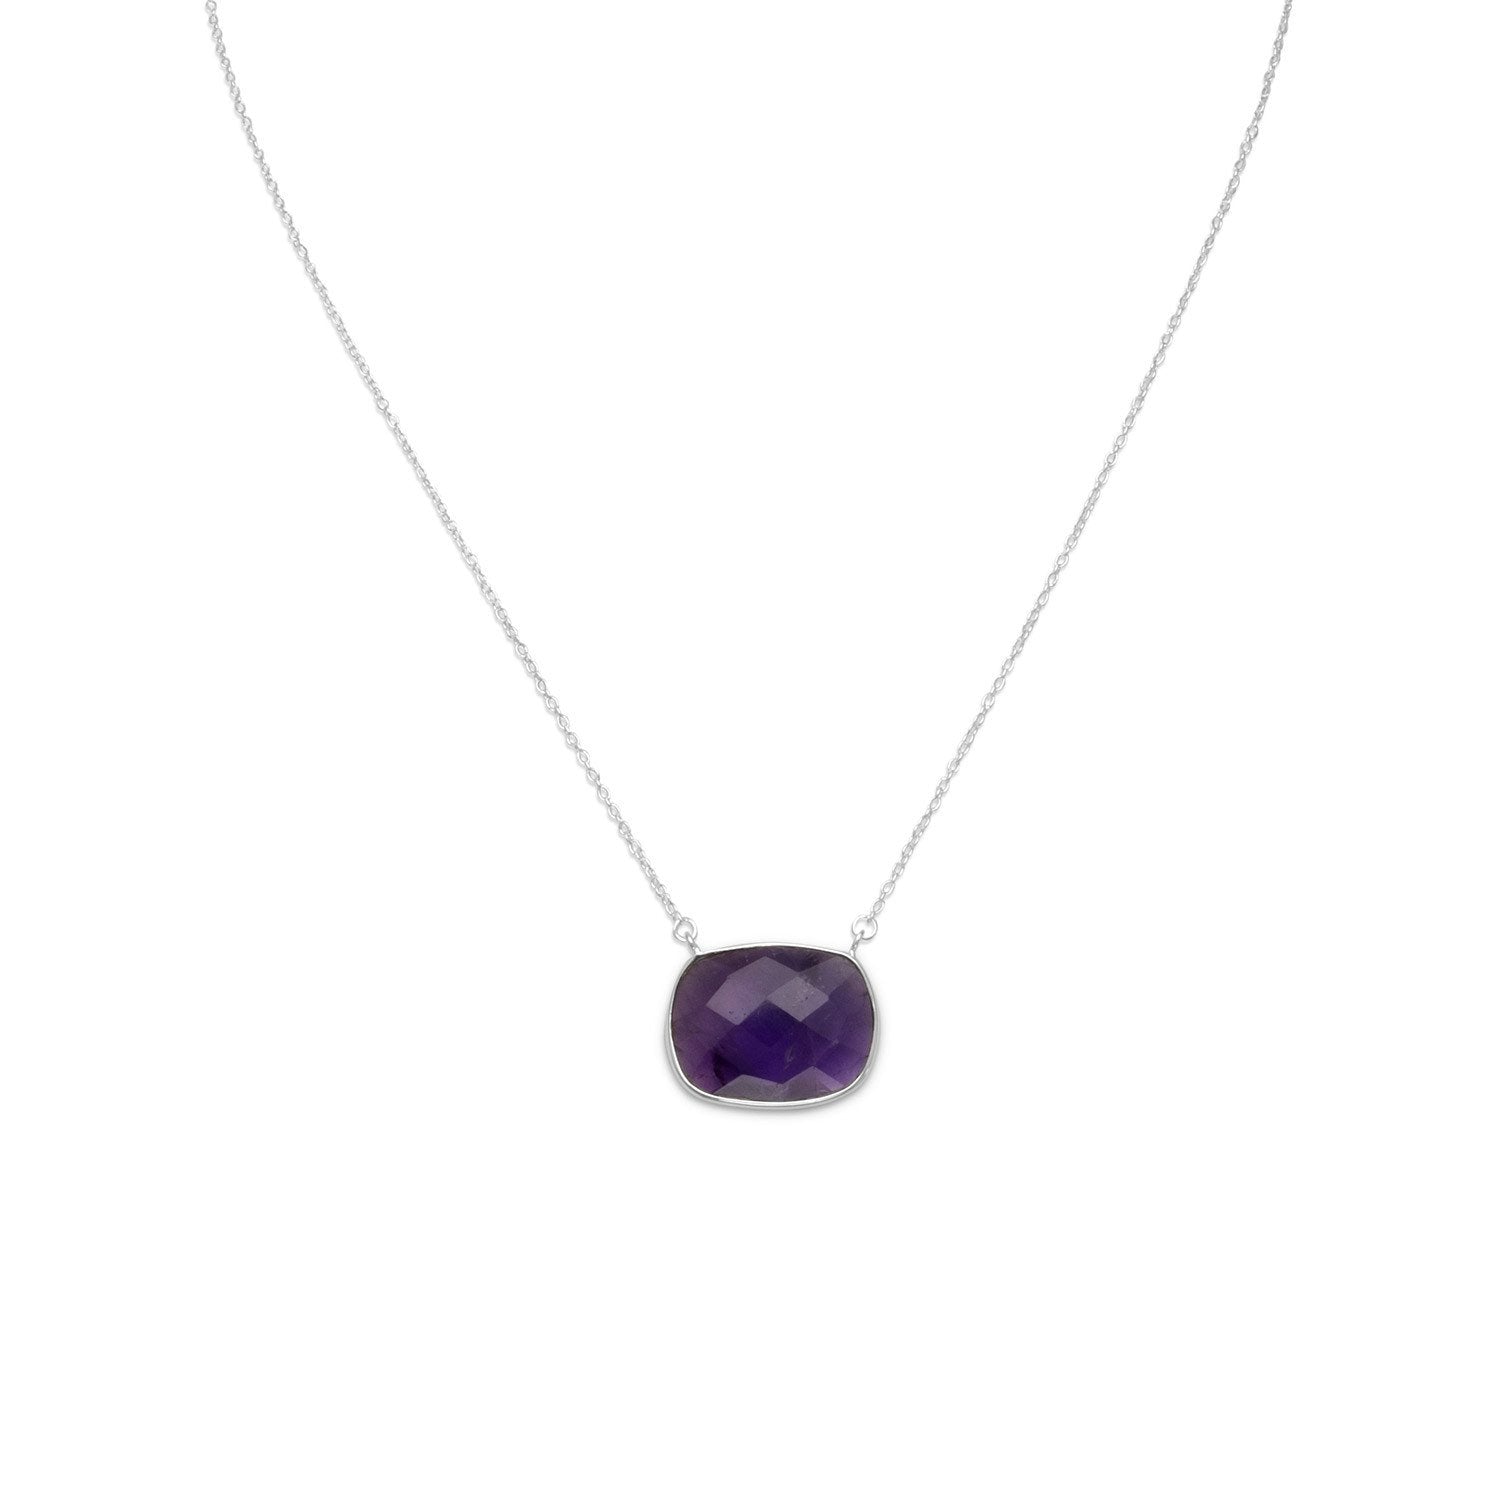 16" + 2" Faceted Oval Amethyst Necklace